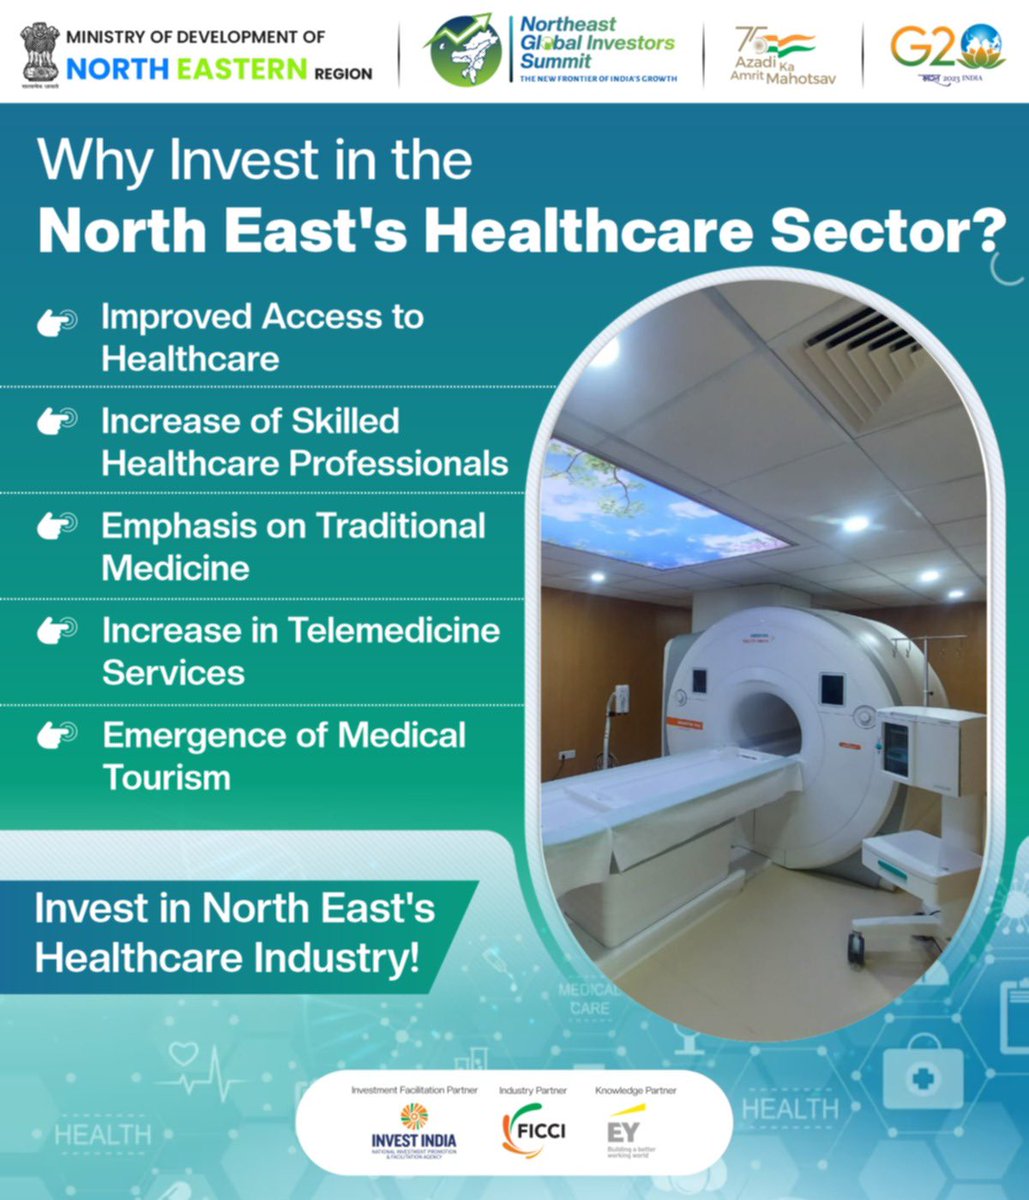 Taking North East's #HealthcareIndustry to new heights!

With a significant rise in the number of healthcare facilities and professionals, the North East's #HealthcareSector is rapidly progressing.